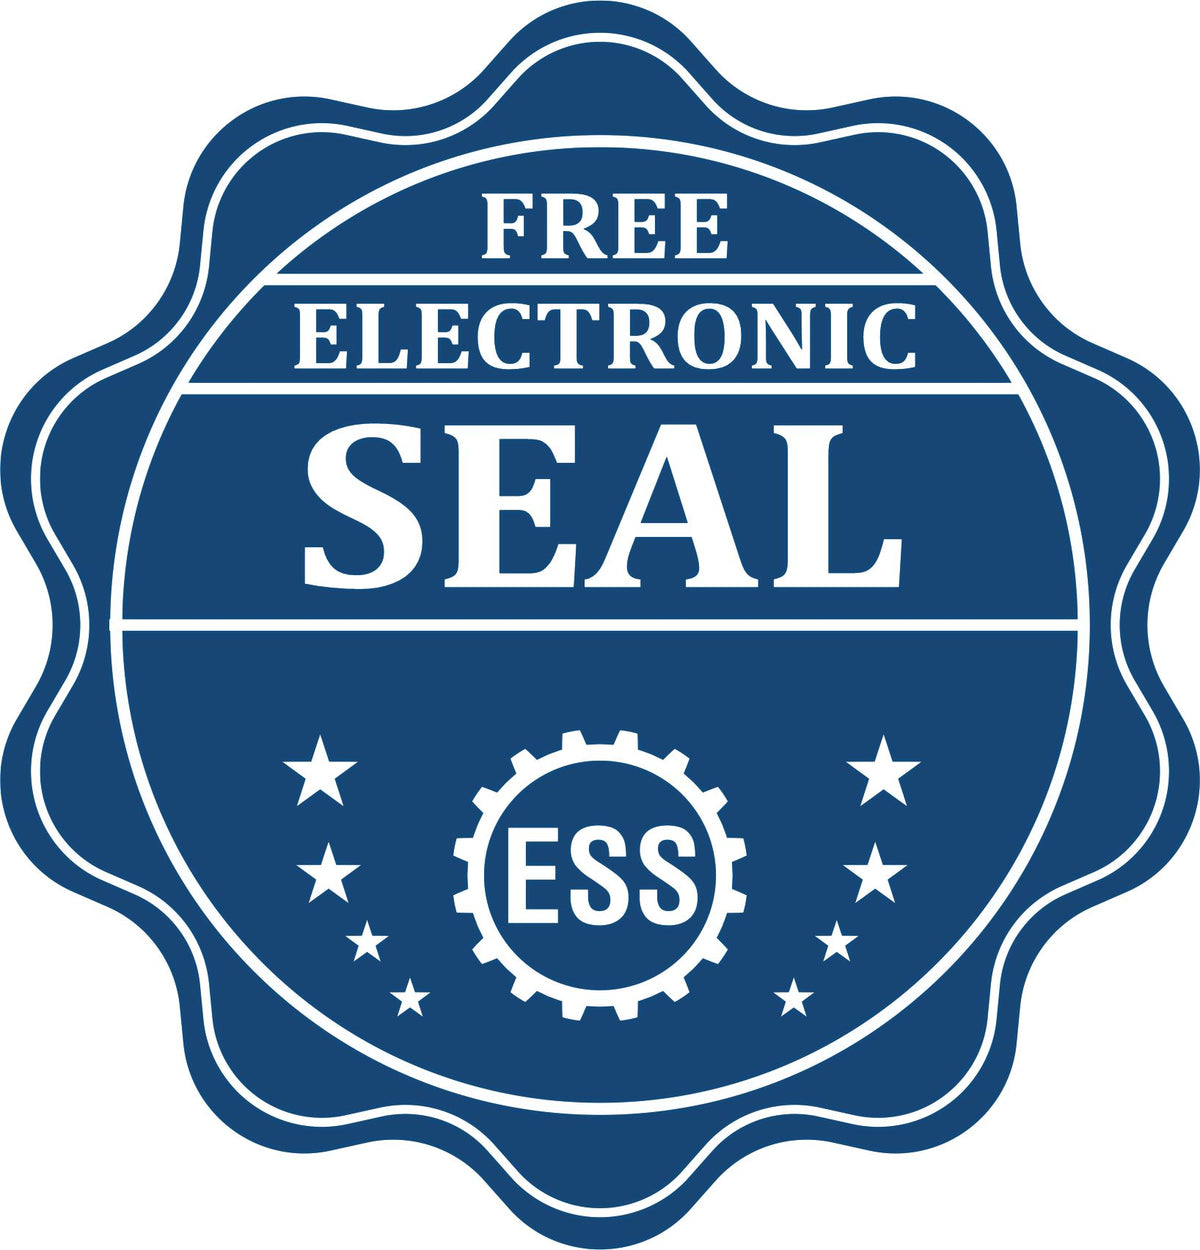 A badge showing a free electronic seal for the Long Reach Maine Geology Seal with stars and the ESS gear on the emblem.